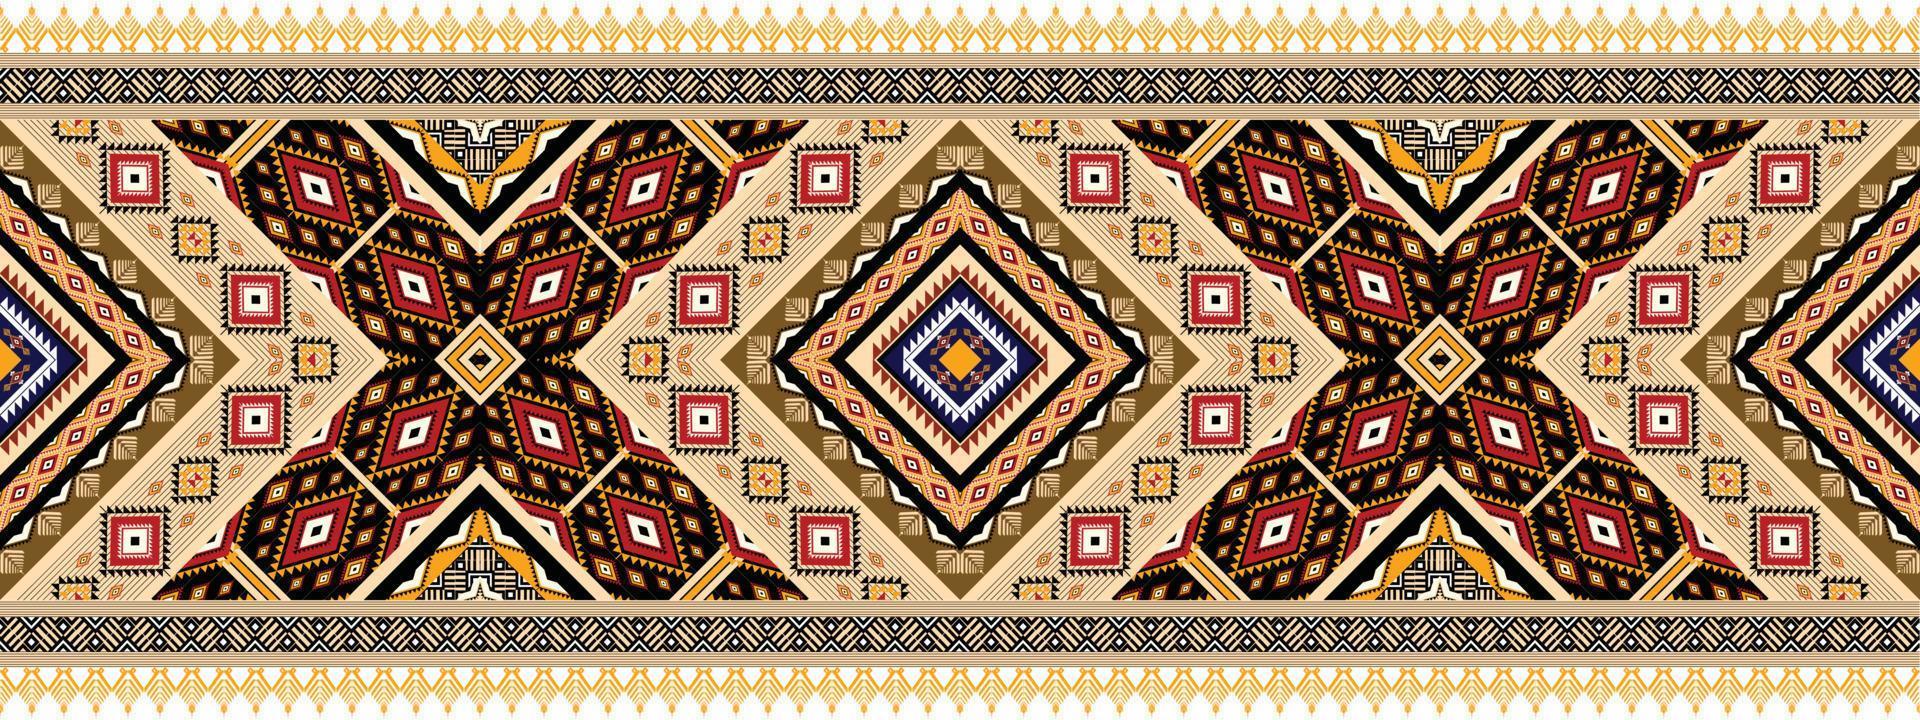 horizontal ethnic geometric pattern. American, Aztec motif textile pattern style. Seamless pattern design for fabric, curtain, background, carpet, wallpaper, clothing, wrapping, tile. American Vector. vector